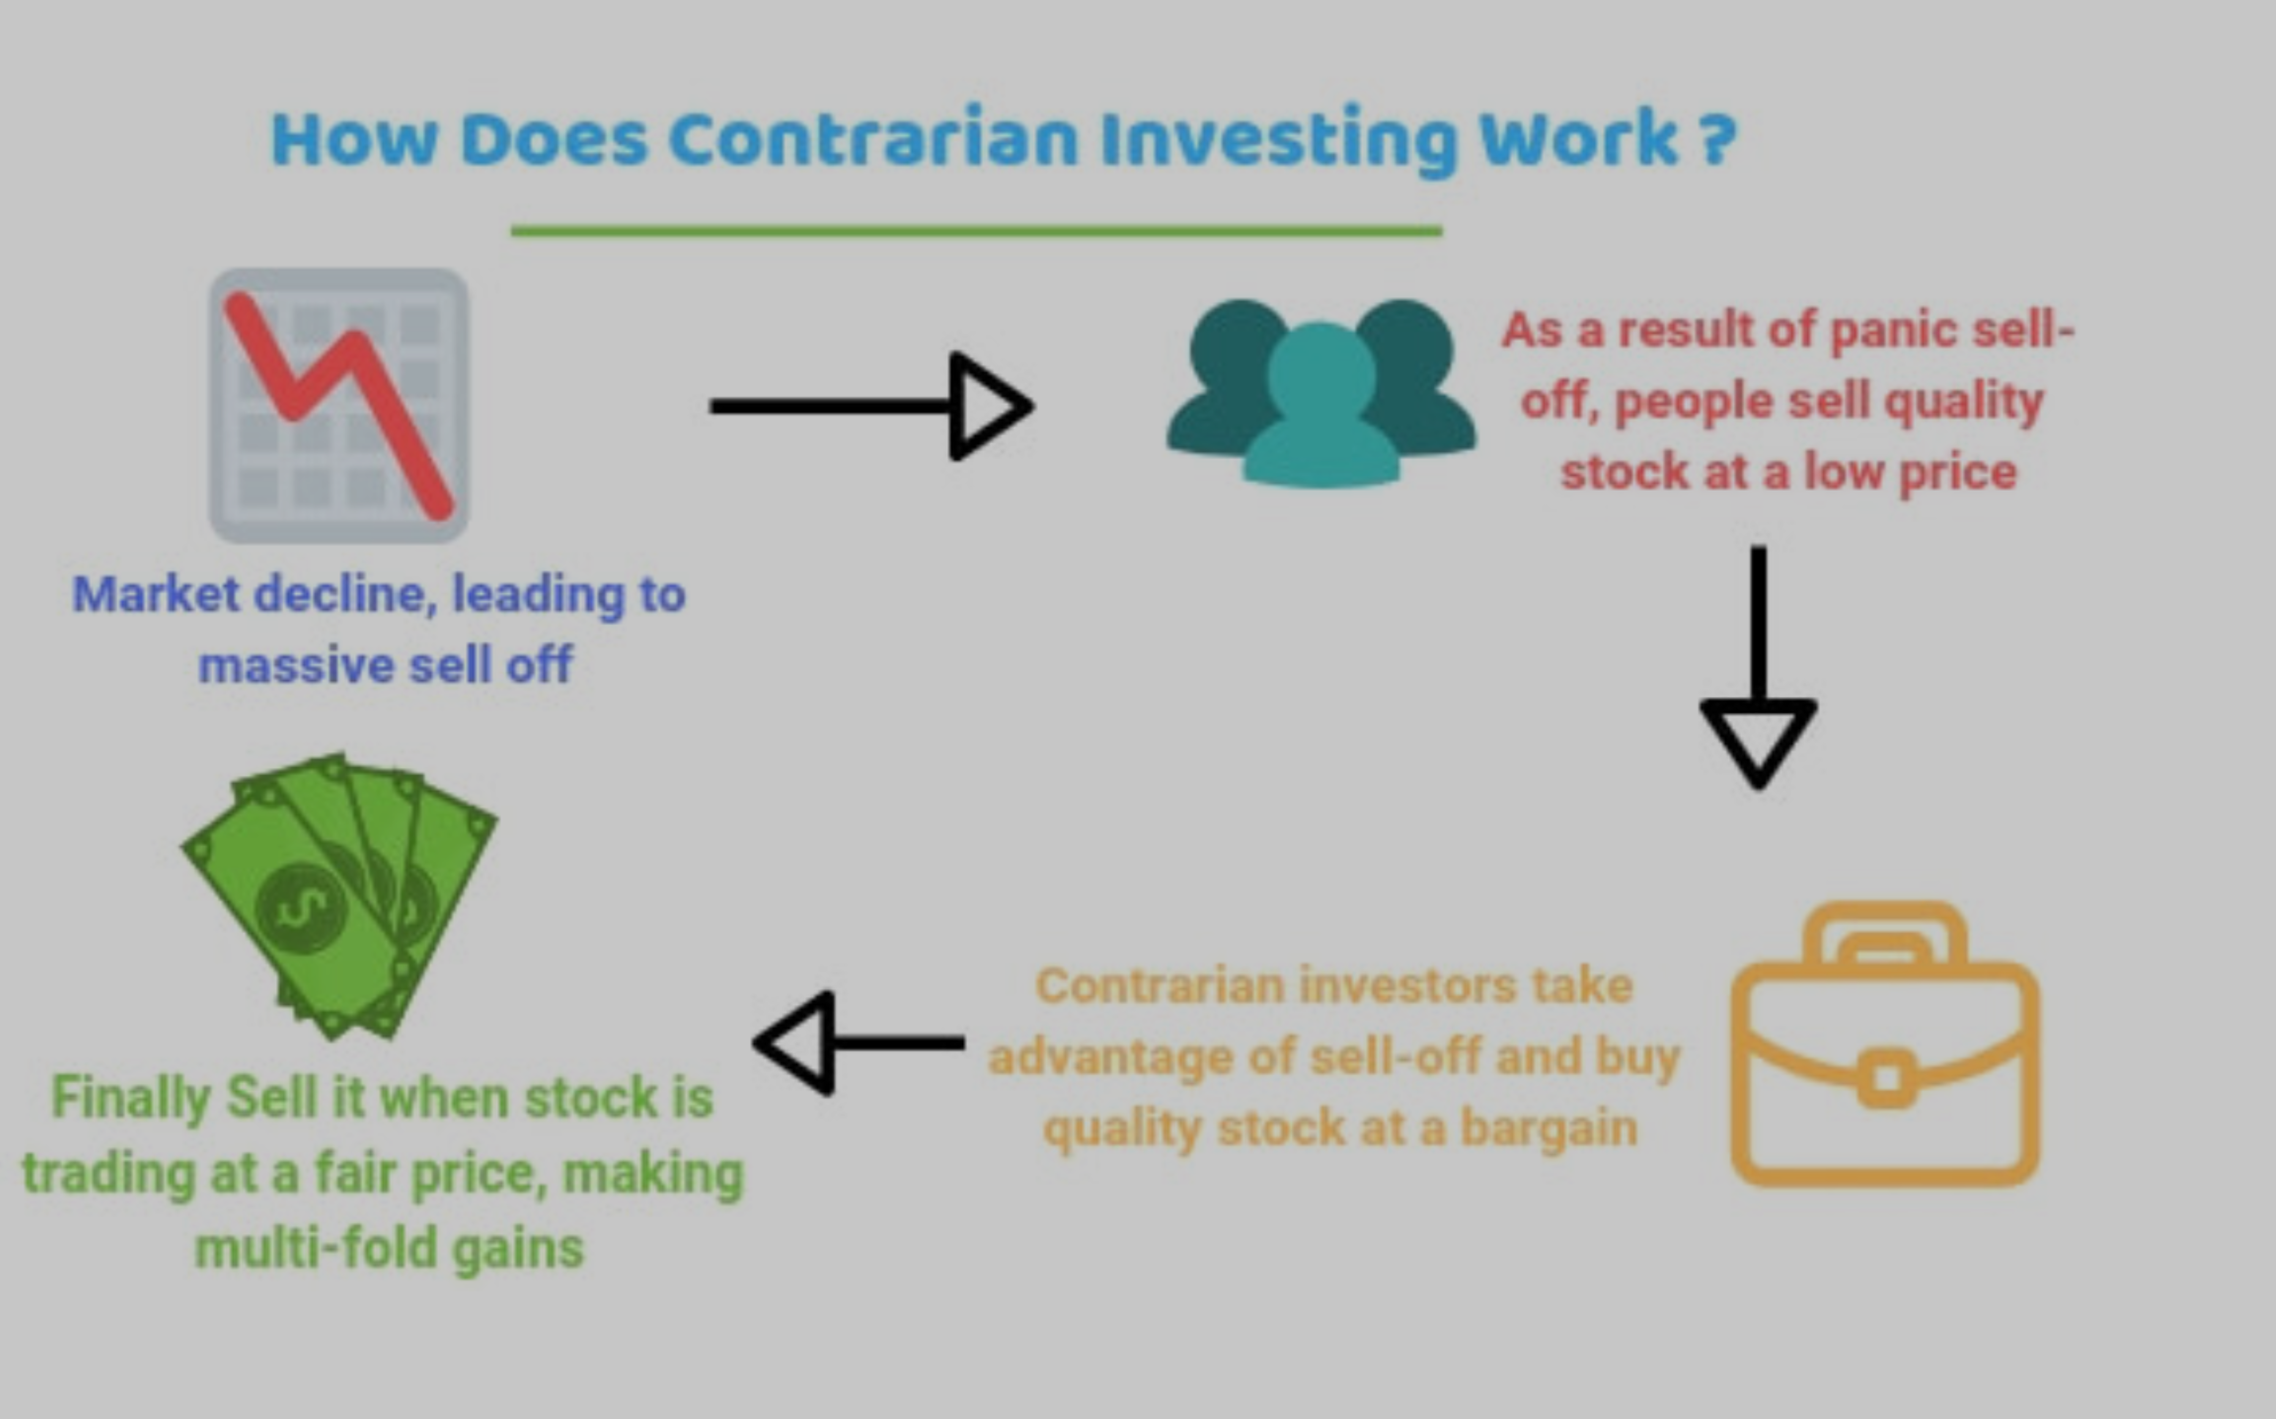 How Does Contrarian Investing Work?